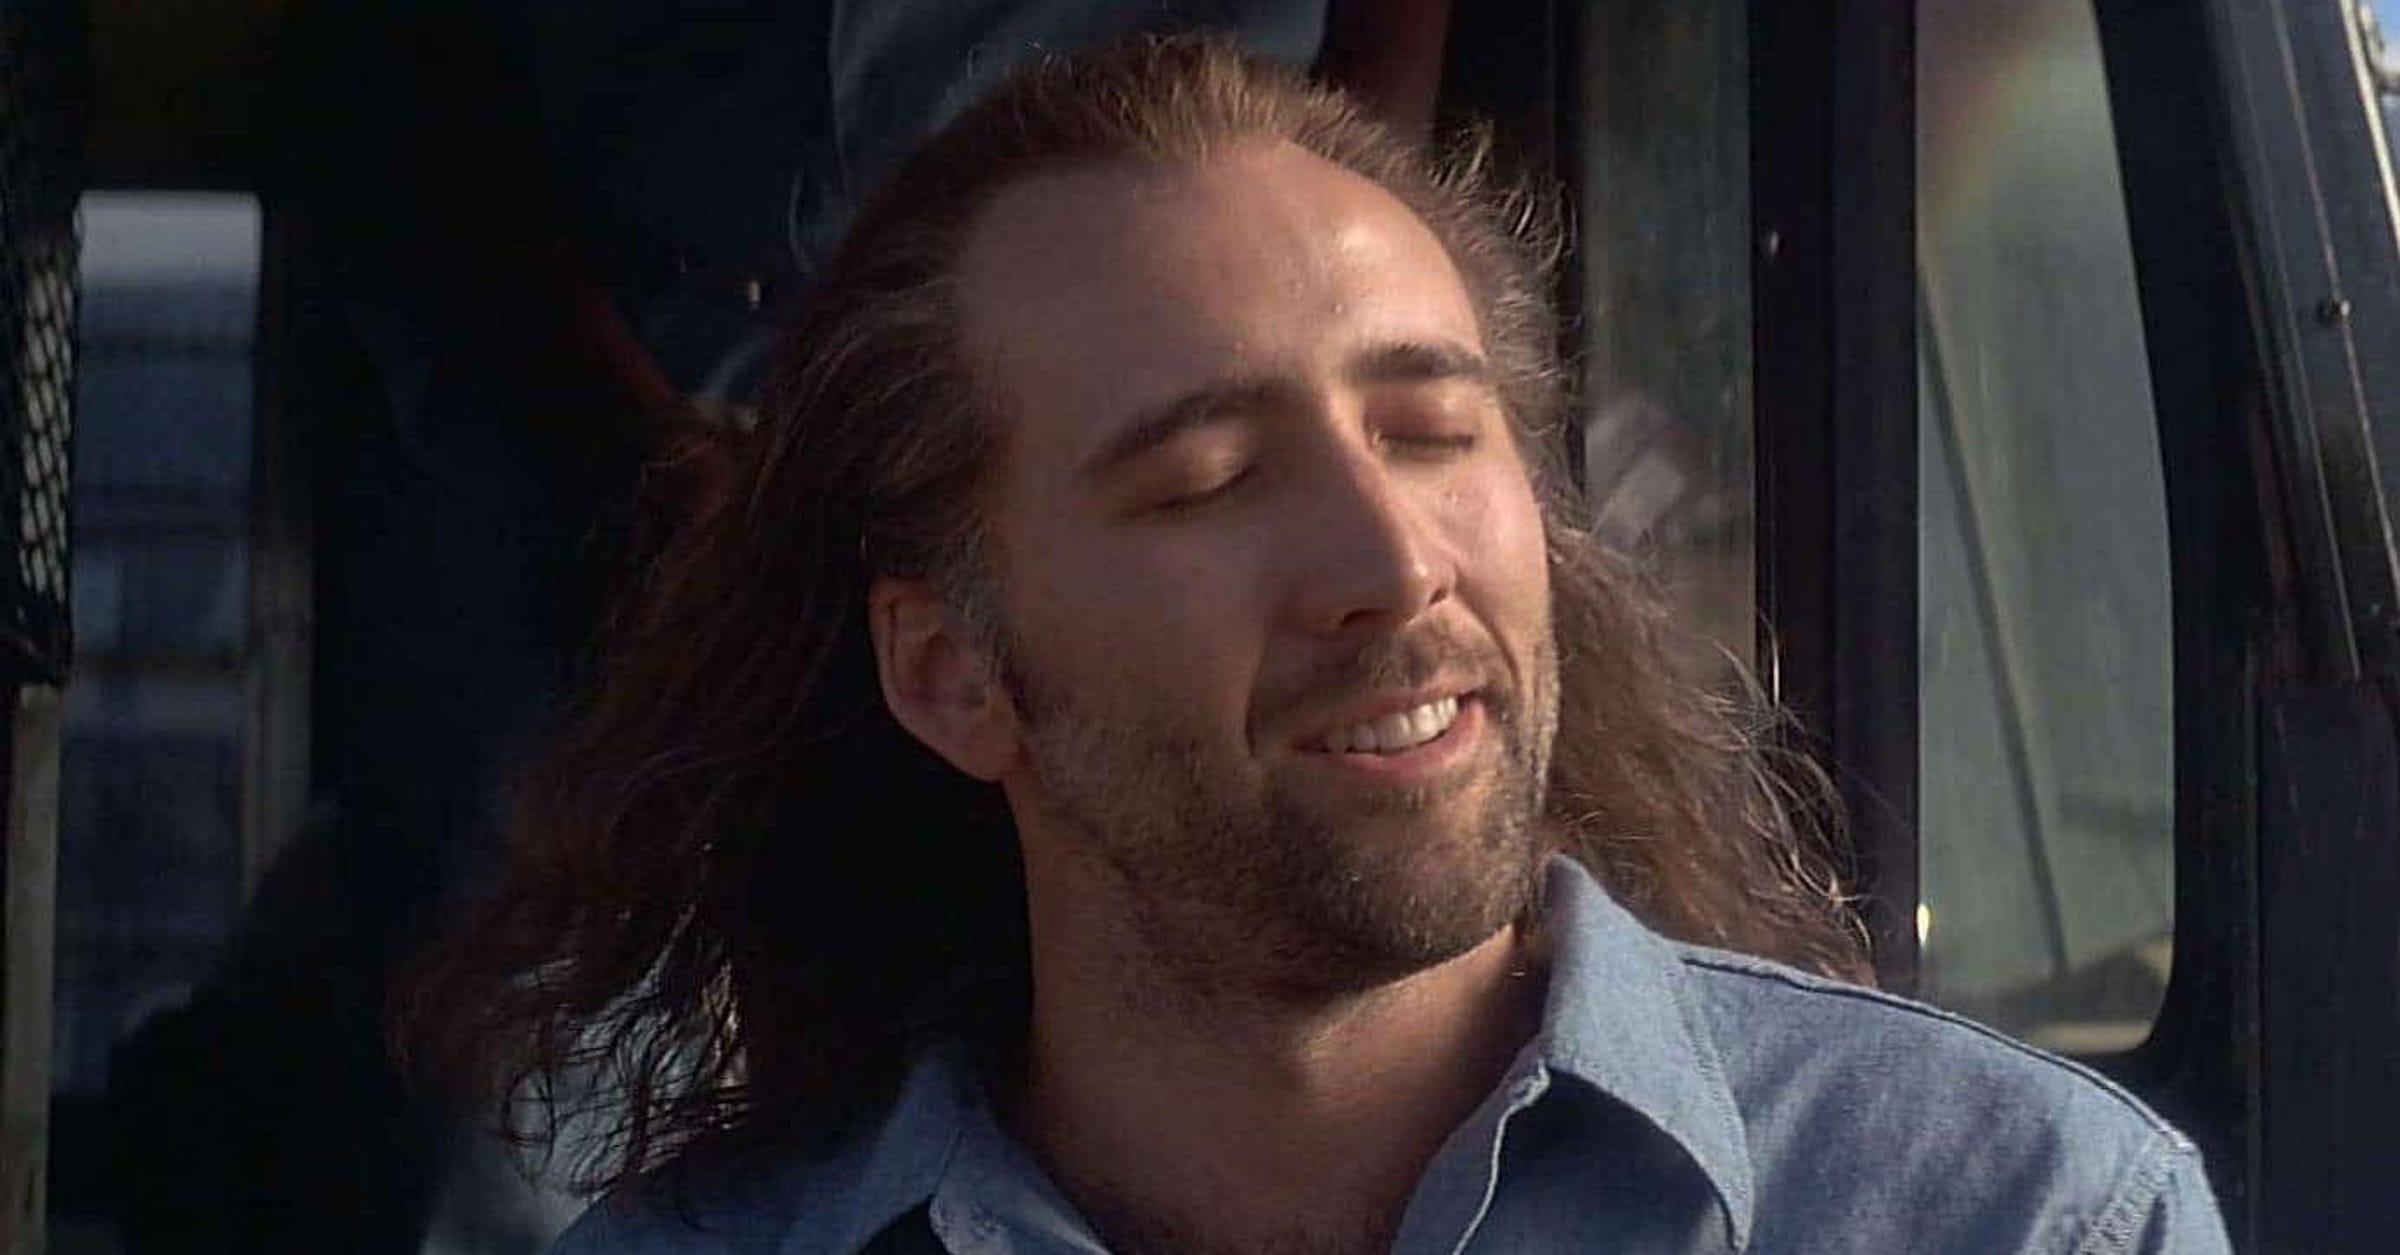 https://imgix.ranker.com/list_img_v2/19233/1999233/original/the-best-con-air-quotes?fit=crop&fm=pjpg&q=80&dpr=2&w=1200&h=720